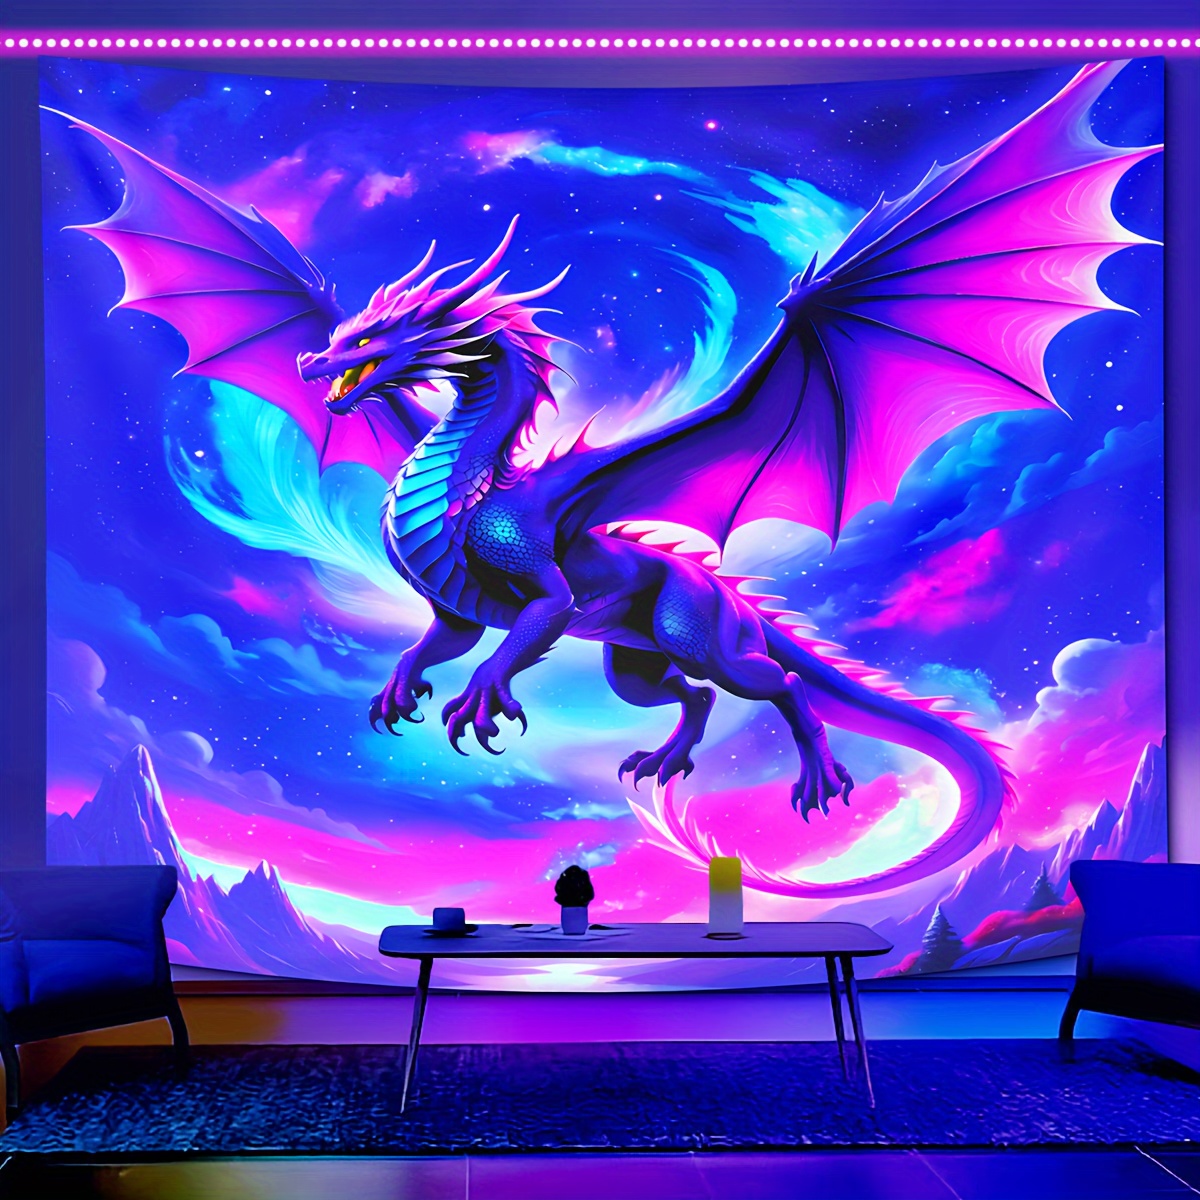 

1pc Dragon Pattern Fluorescent Tapestry, Uv Blacklight Tapestry, Wall Hanging For Living Room Bedroom Office, Home Decor Room Decor Party Decor, With Free Installation Package